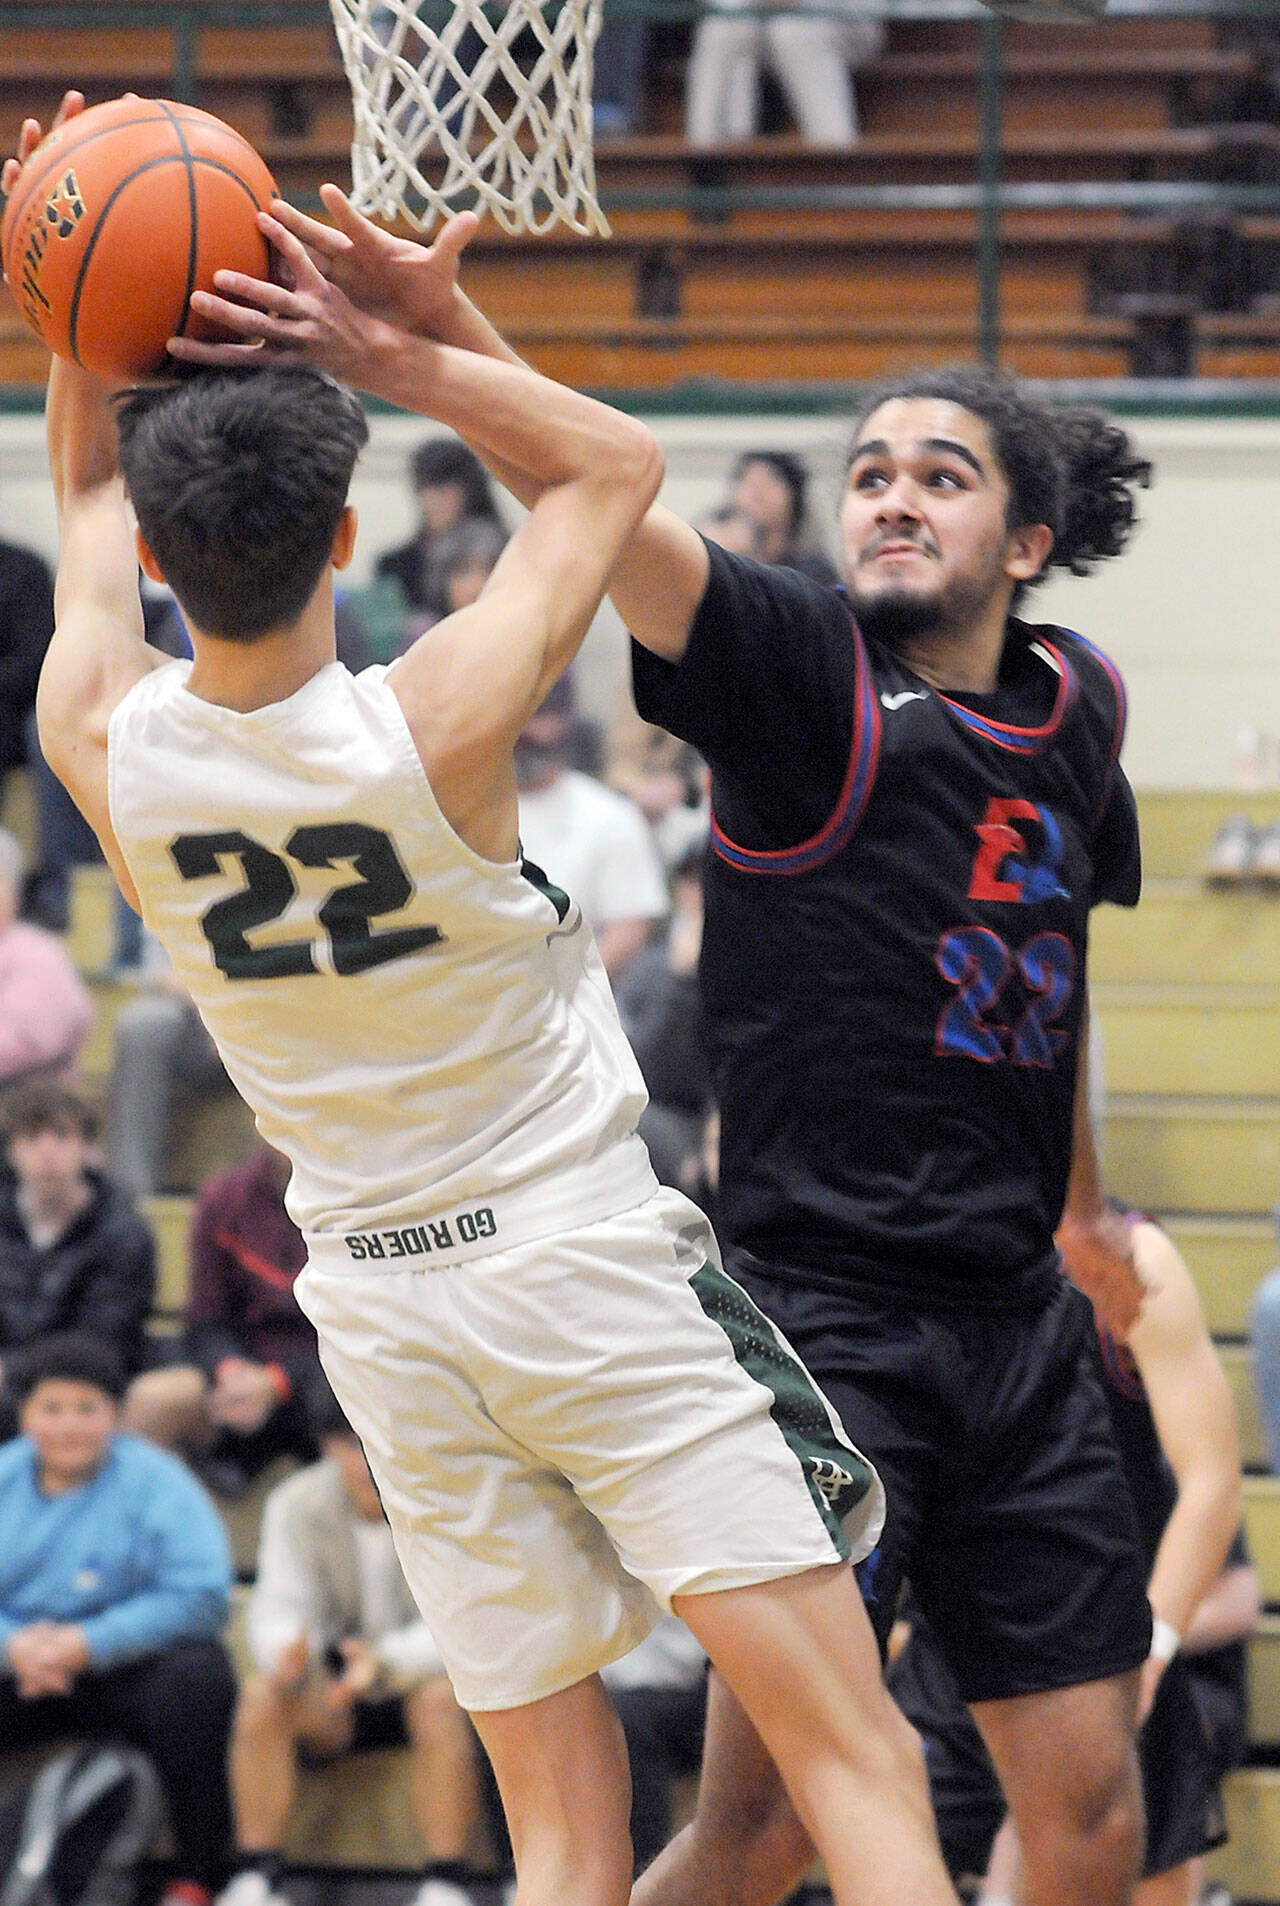 KEITH THORPE/PENINSULA DAILY NEWS East Jefferson’s Lorenzo McCleese, right denies a shot by Port Angeles’ Tyler Hunter during Thursday’s game in Port Angeles.